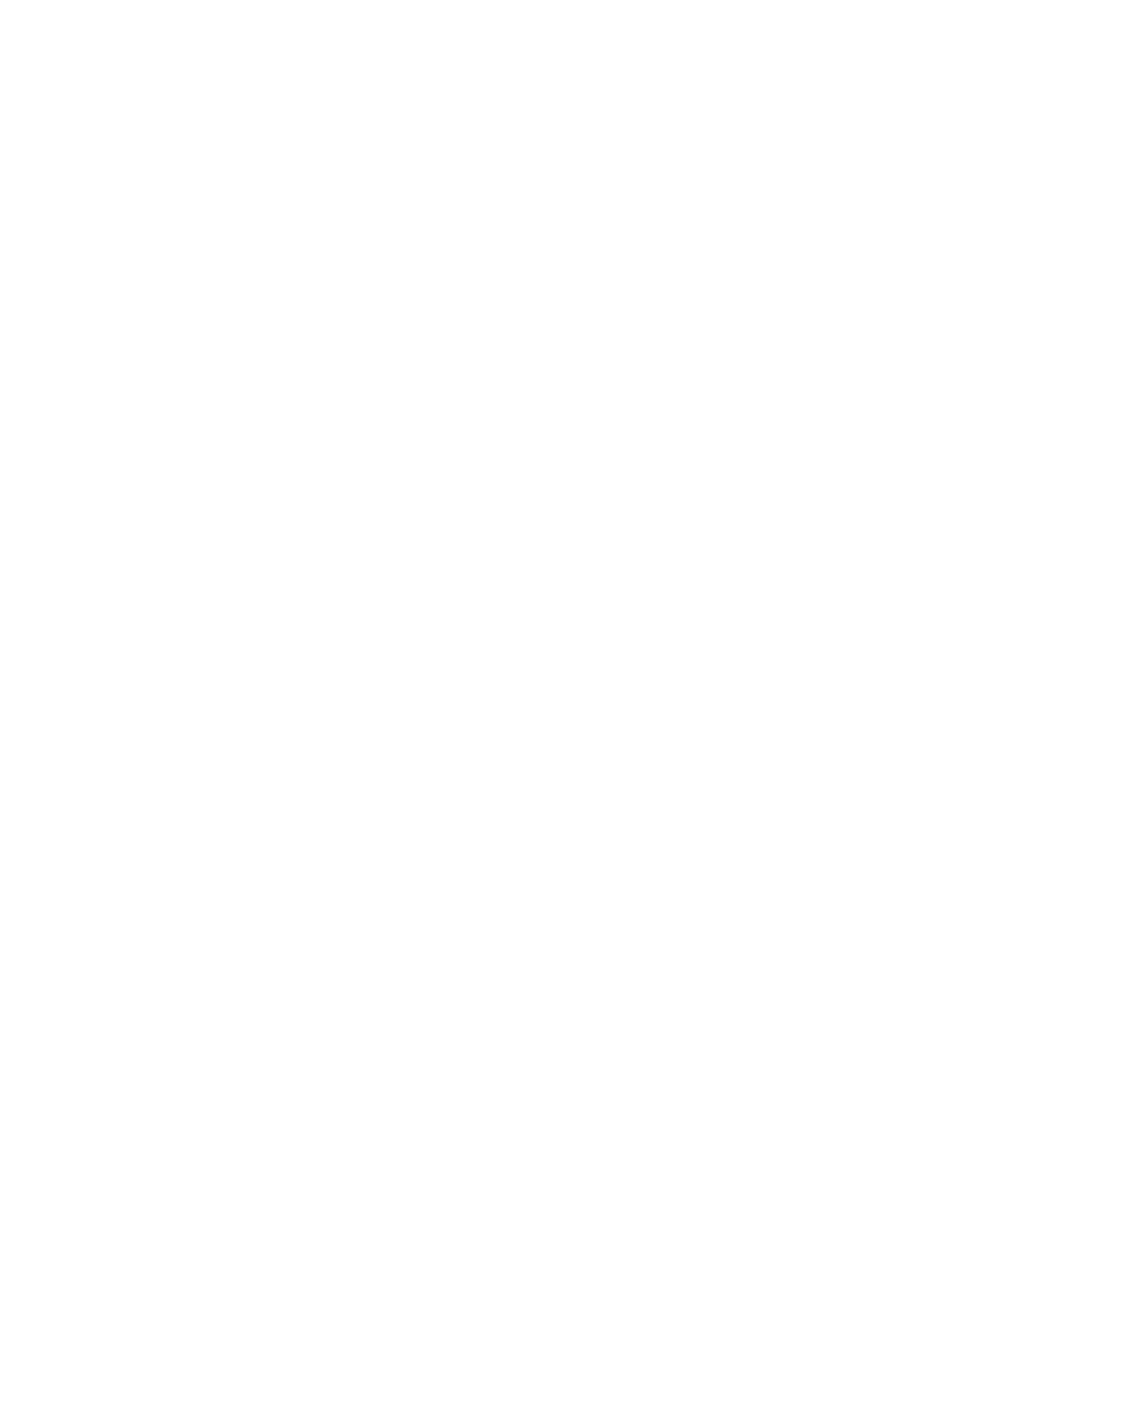 65 Years of BFPA